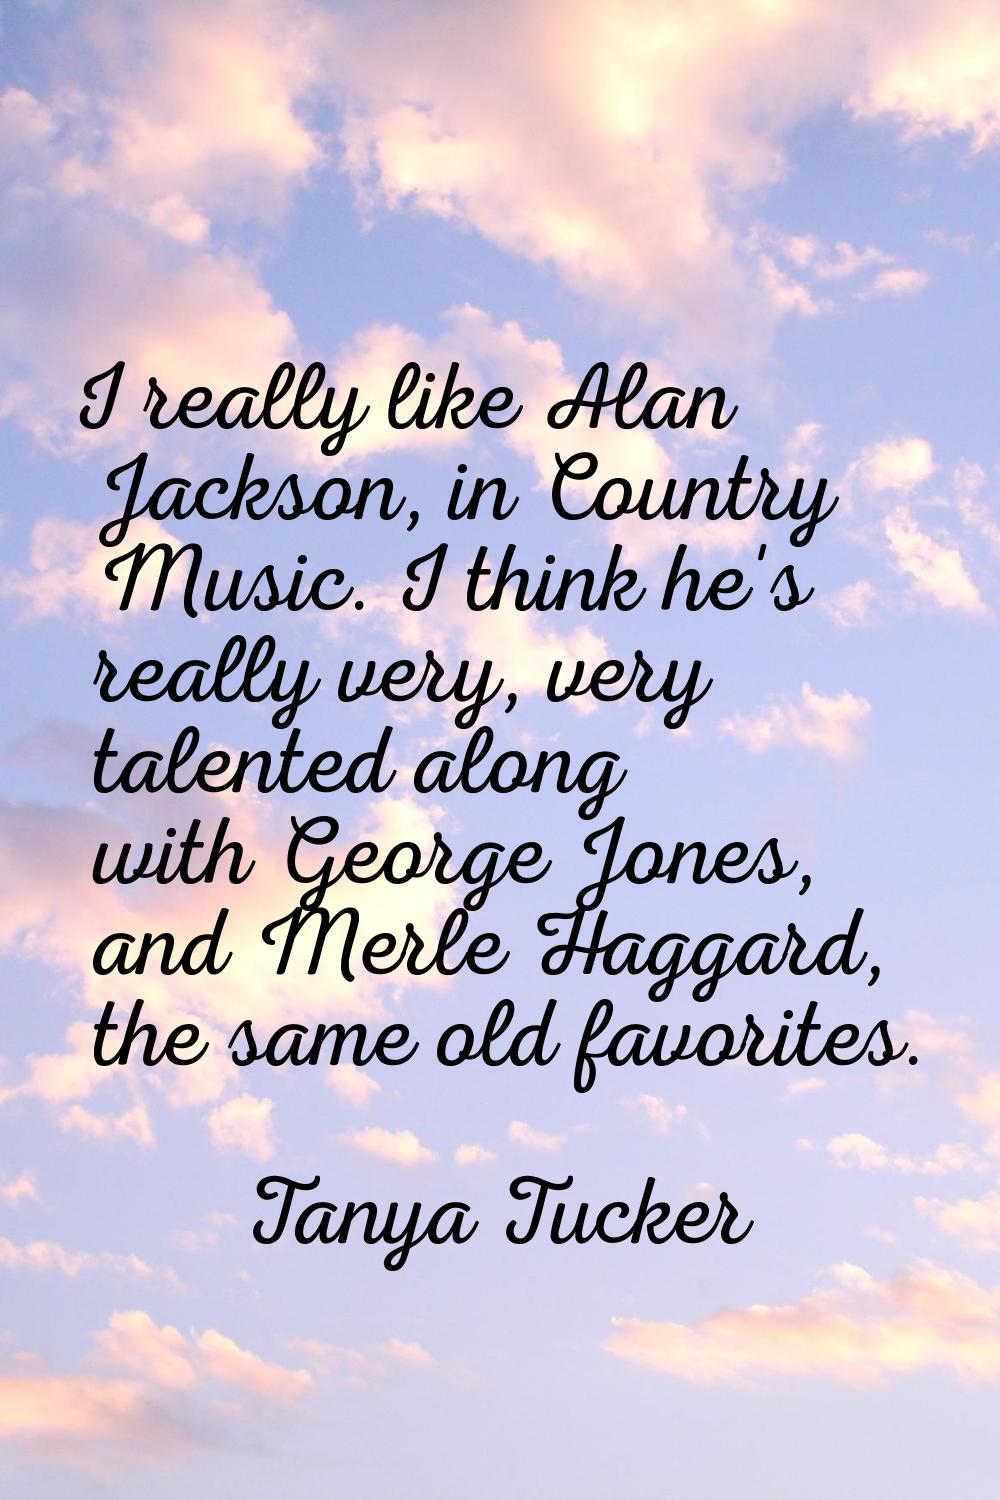 I really like Alan Jackson, in Country Music. I think he's really very, very talented along with Ge